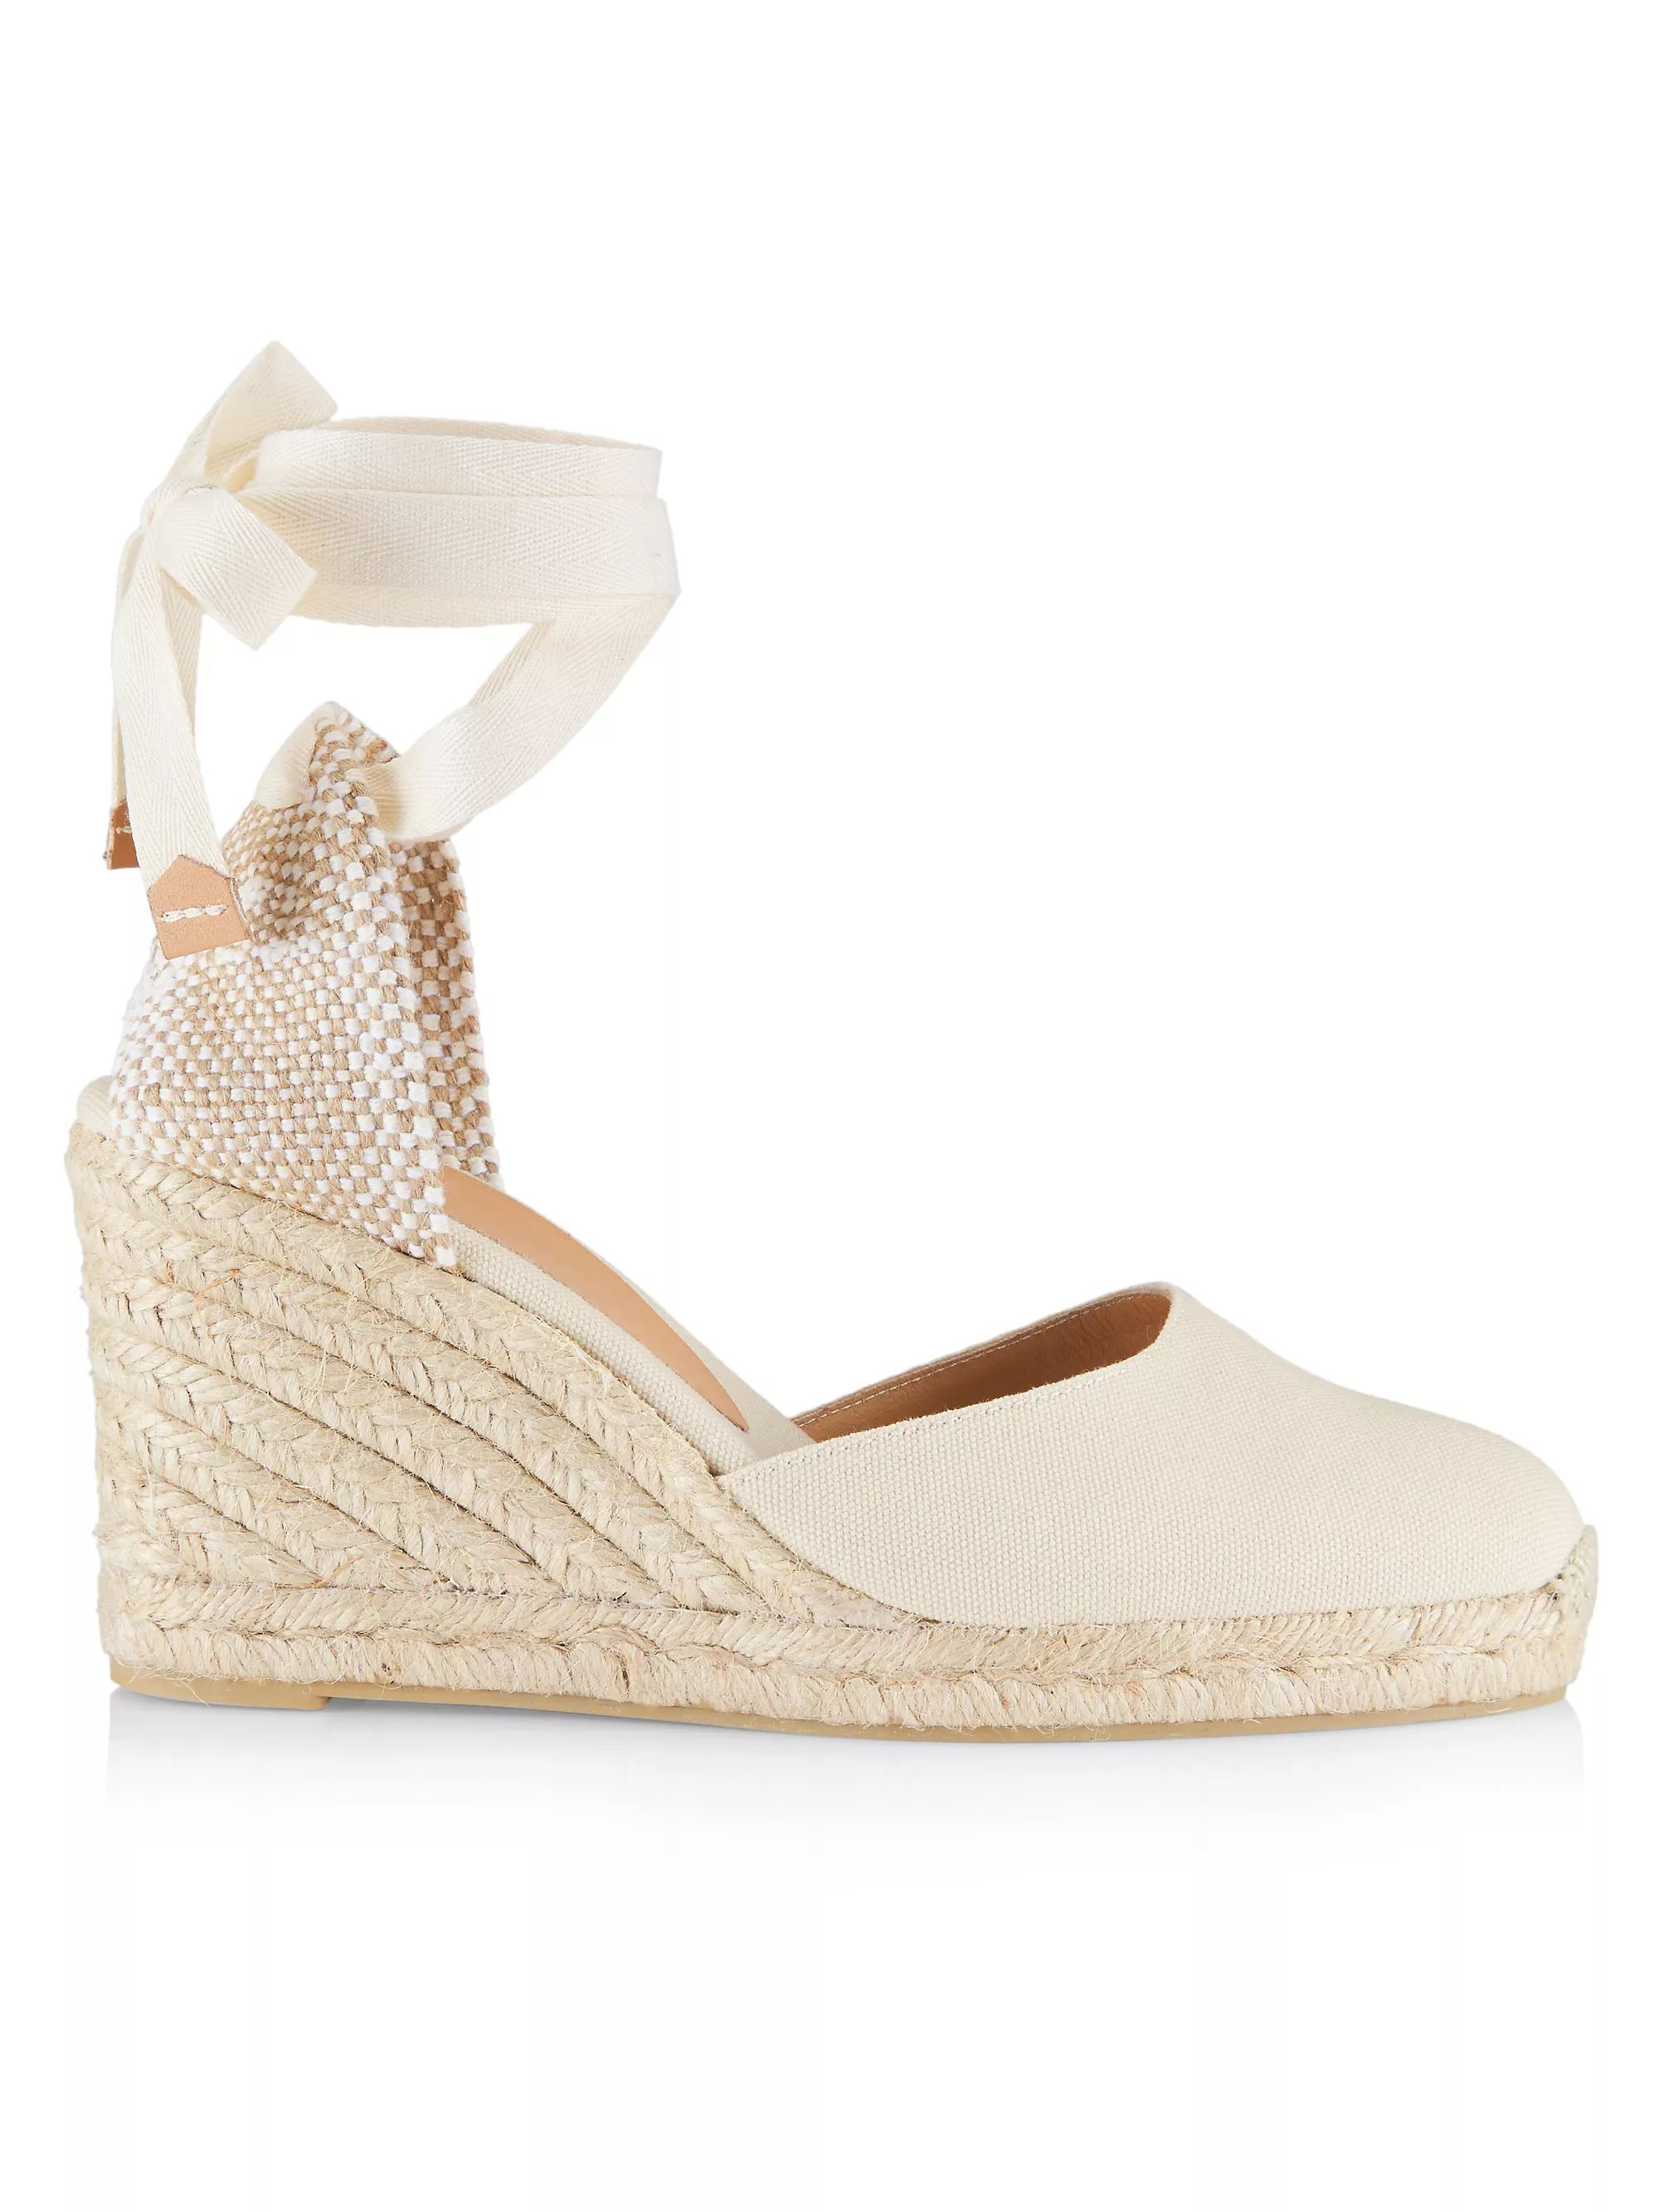 IvoryAll Shop By CategoryCastañerCarina Espadrille WedgesRating: 5 out of 5 stars1$150
         ... | Saks Fifth Avenue